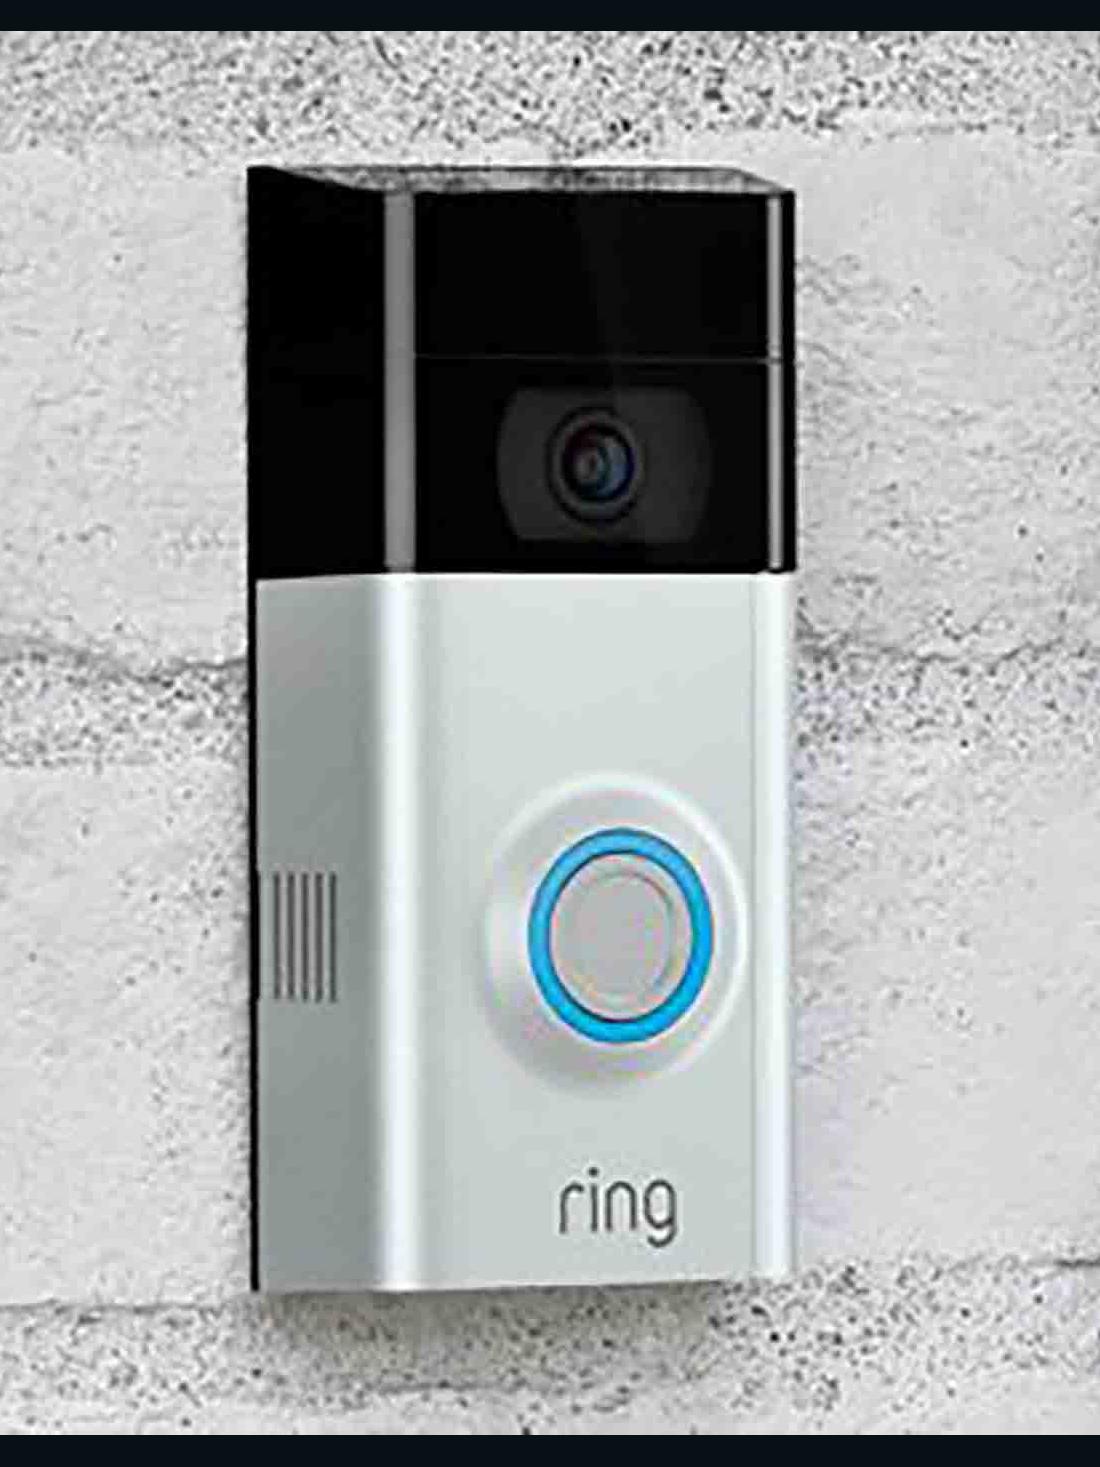 This refurb Ring Video Doorbell 2 is ringing up at a discount for one day